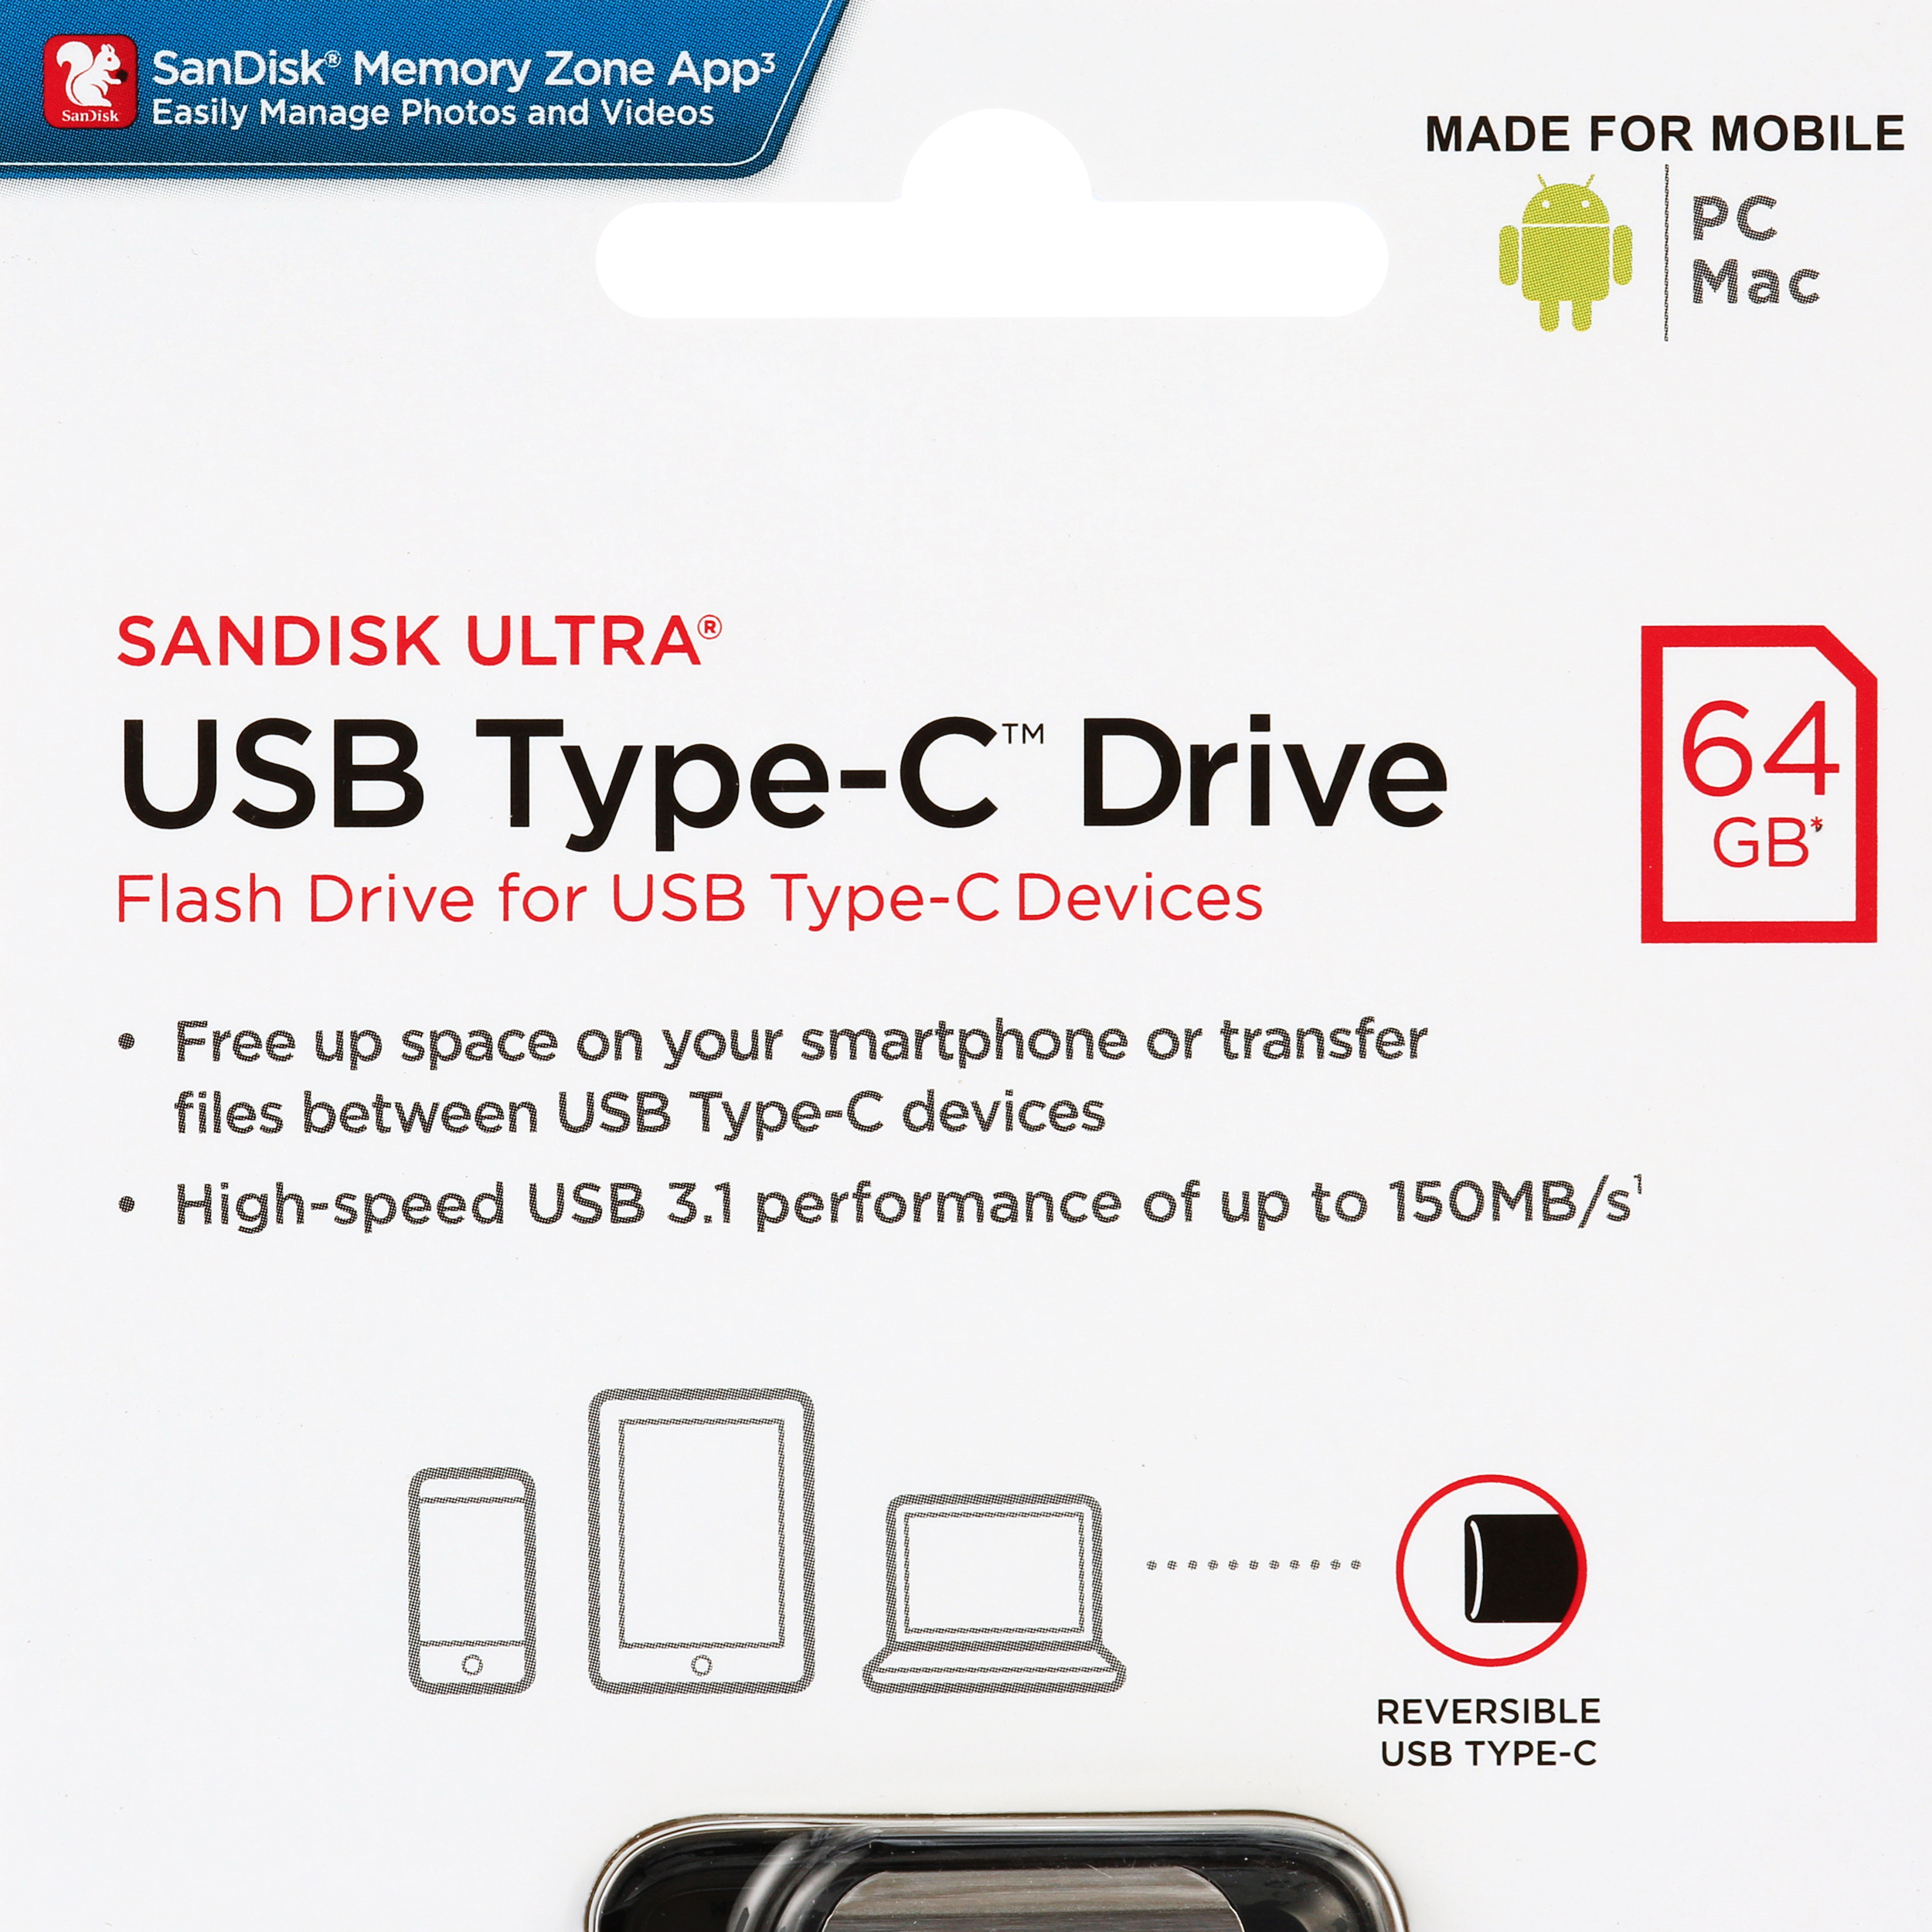 SanDisk Ultra USB Type-C 64GB Flash Drive (SDCZ450-064G-G46) - image 3 of 5